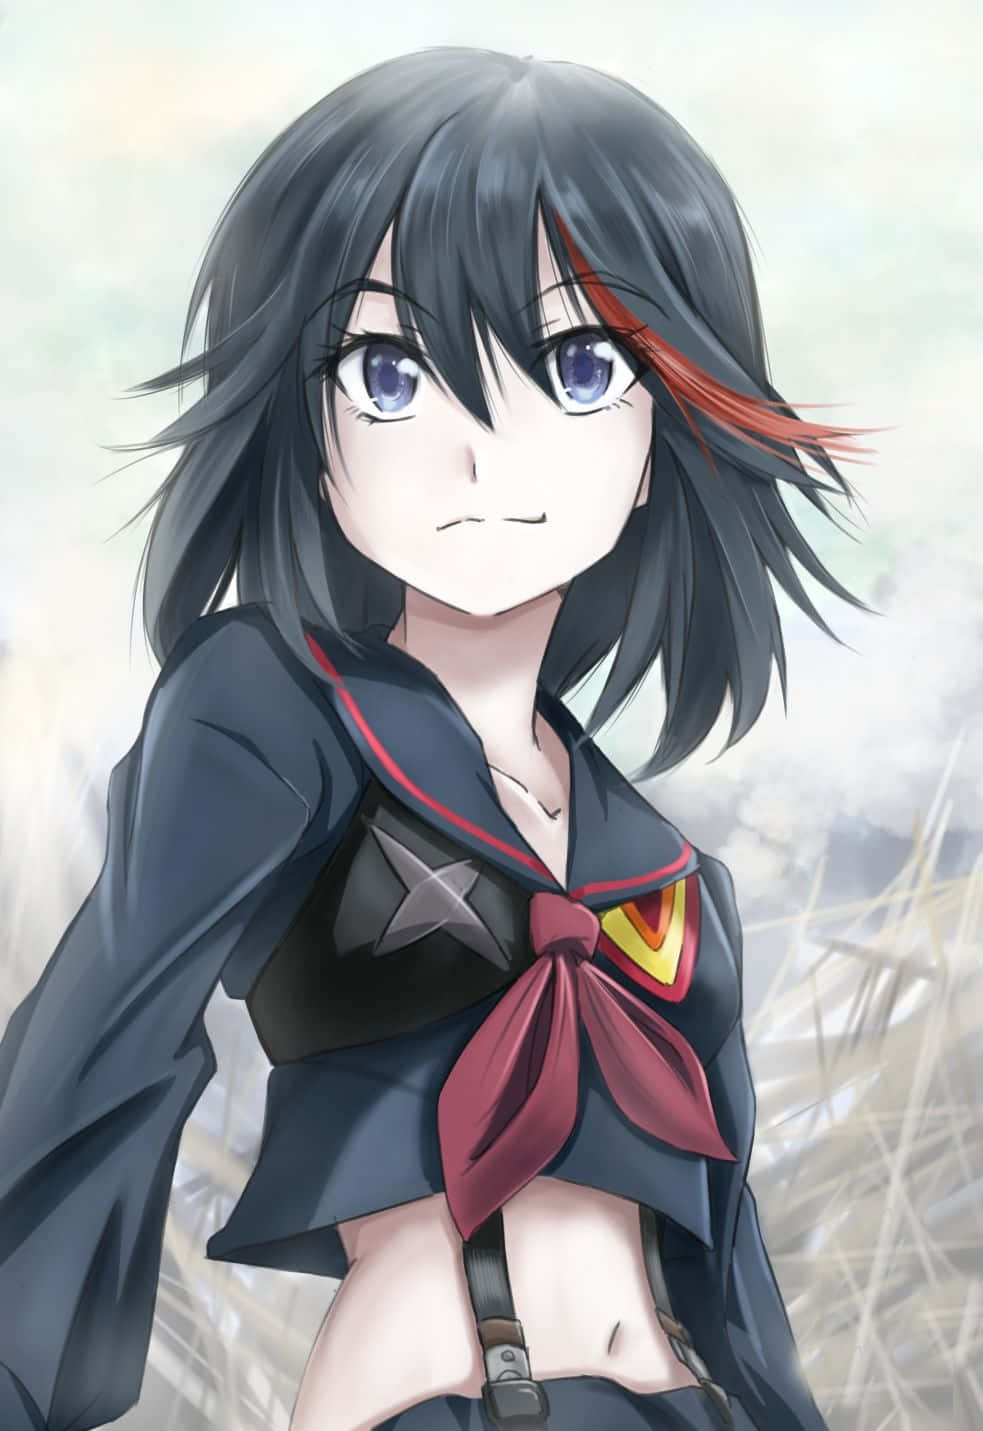 Ryuko Matoi ready for action in a high-quality wallpaper Wallpaper